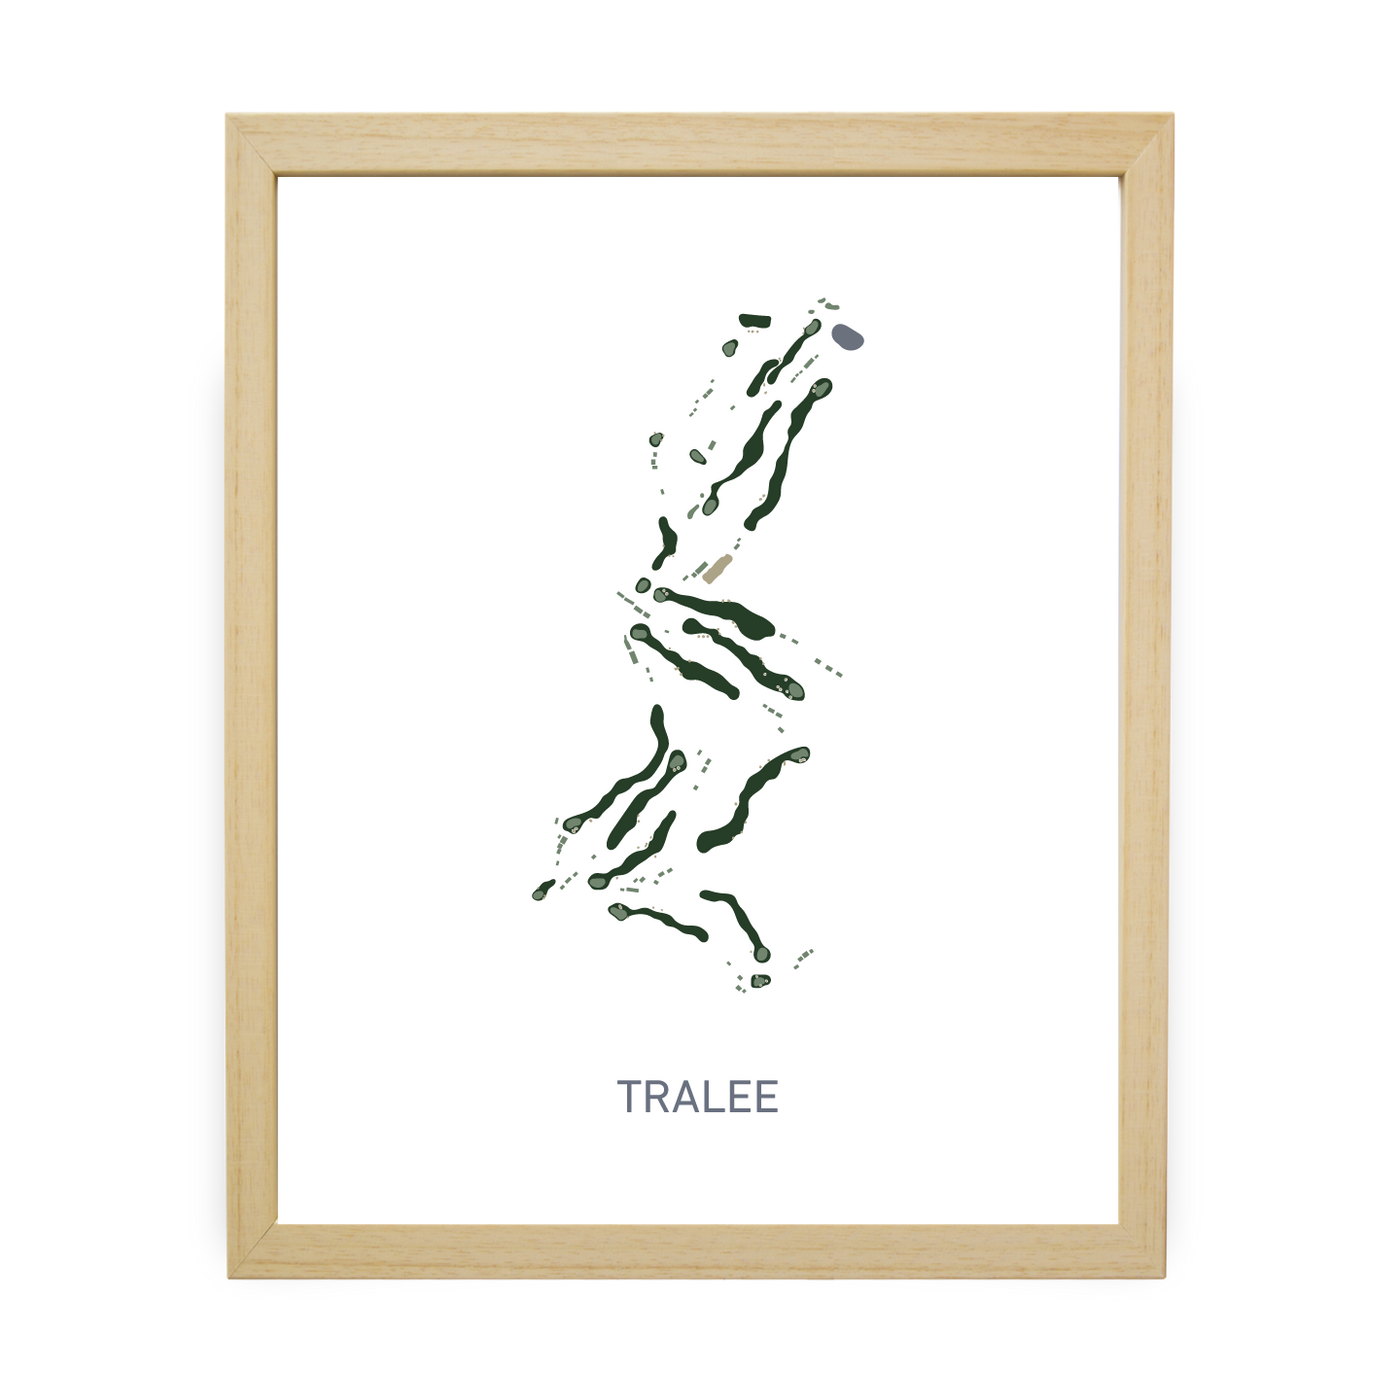 Tralee (Traditional)